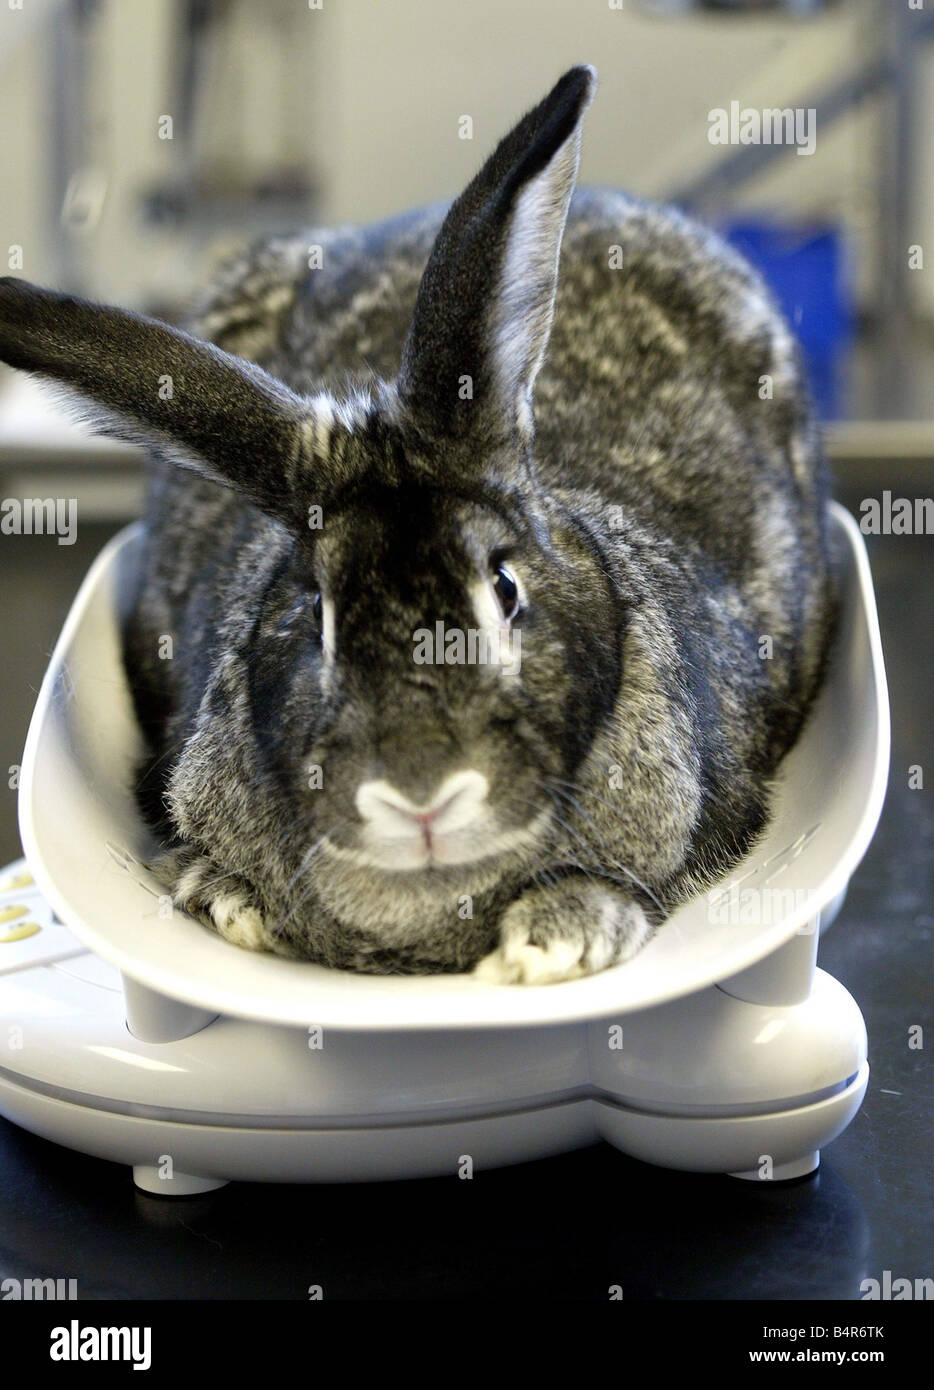 Brian the overweight rabbit on the scales Stock Photo - Alamy